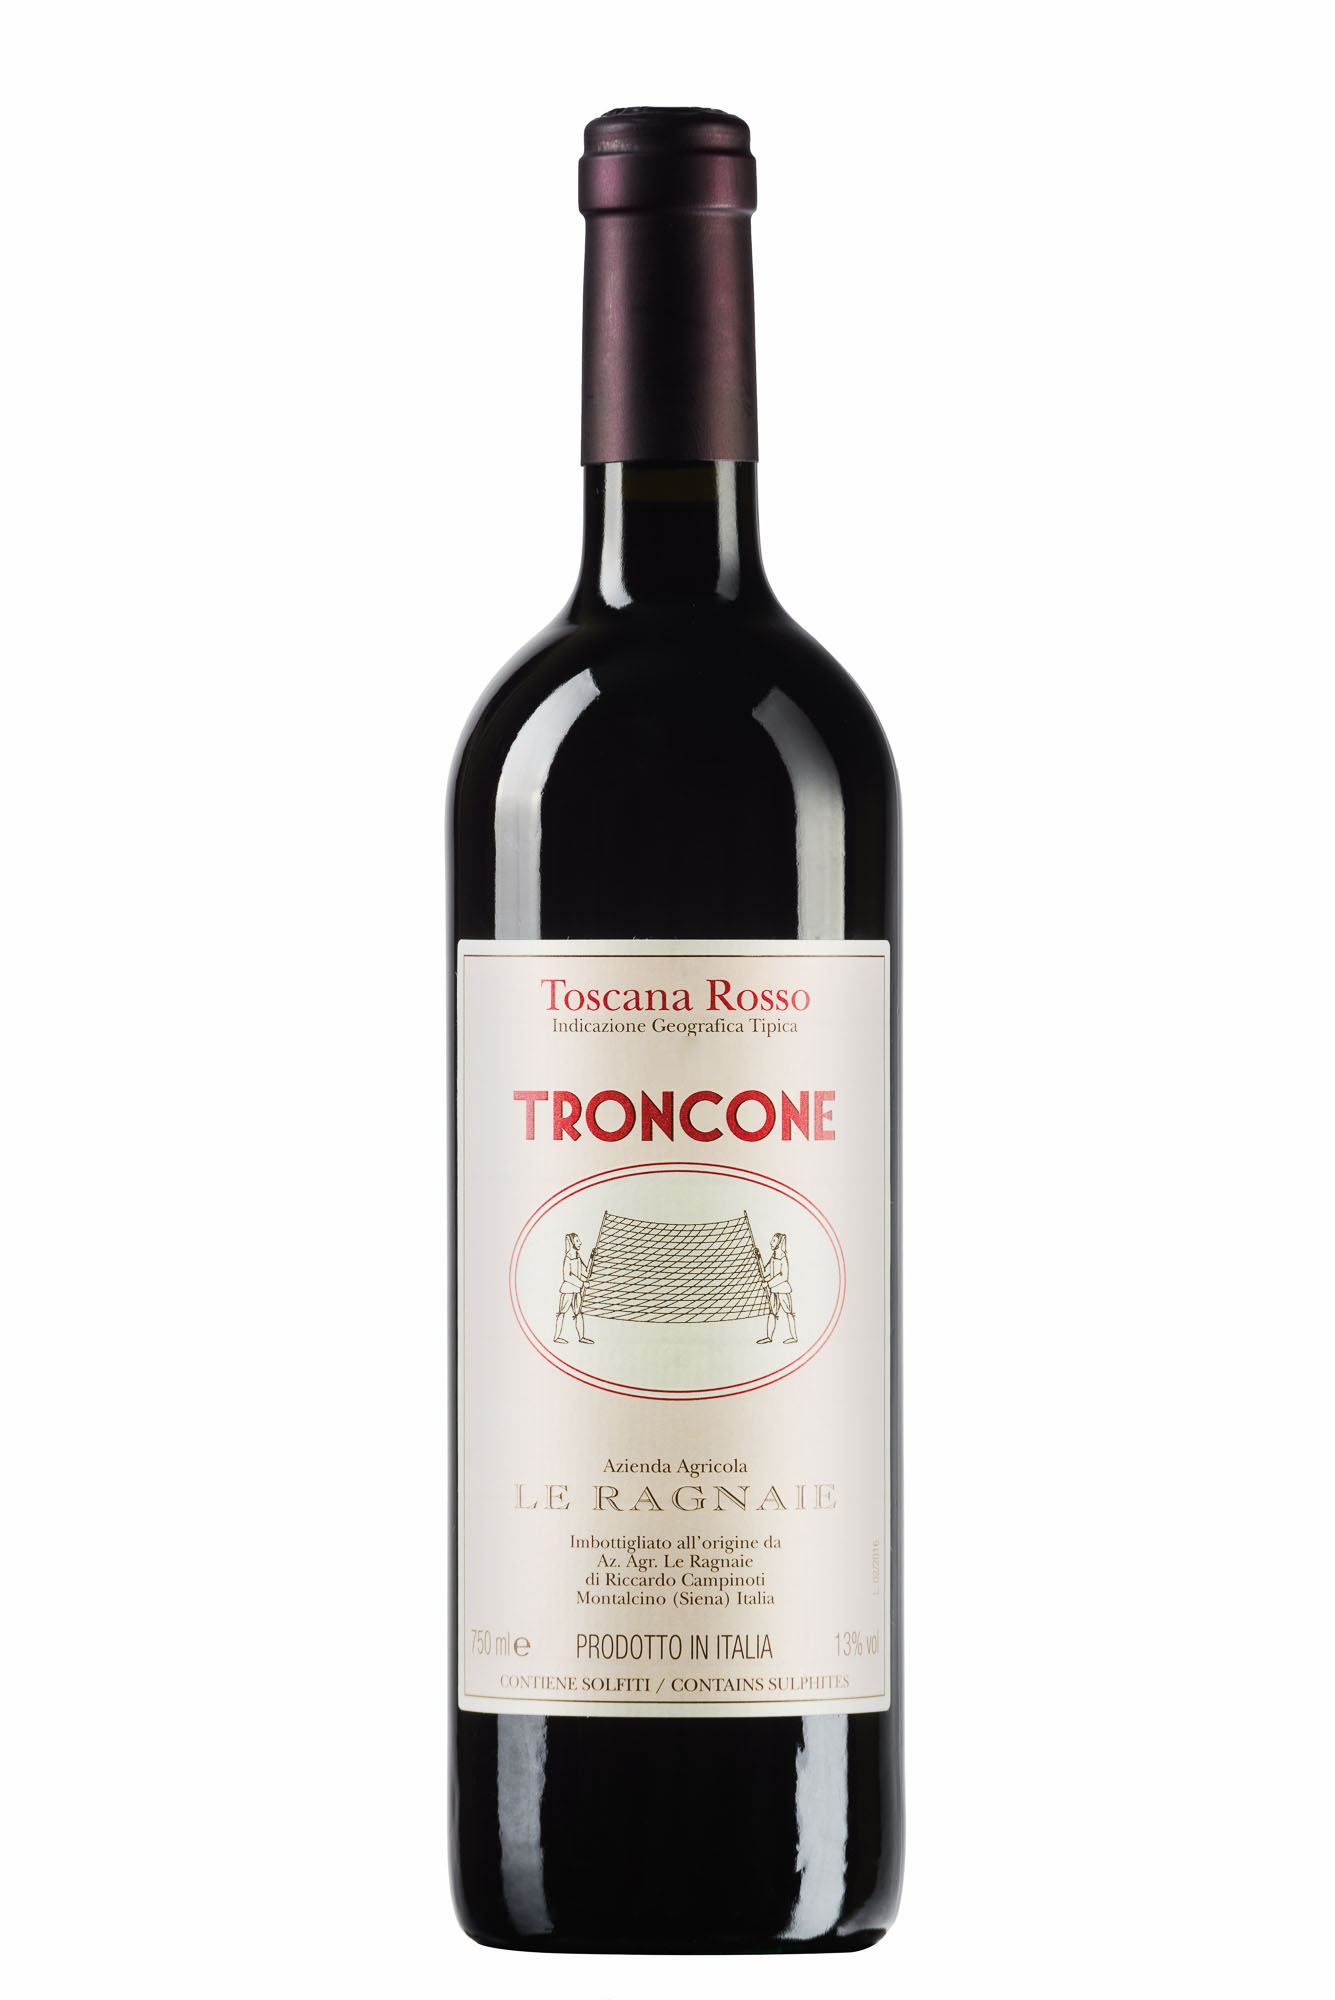 La Ragnaie Troncone 750mL a tall dark wine bottle with a white label and maroon top